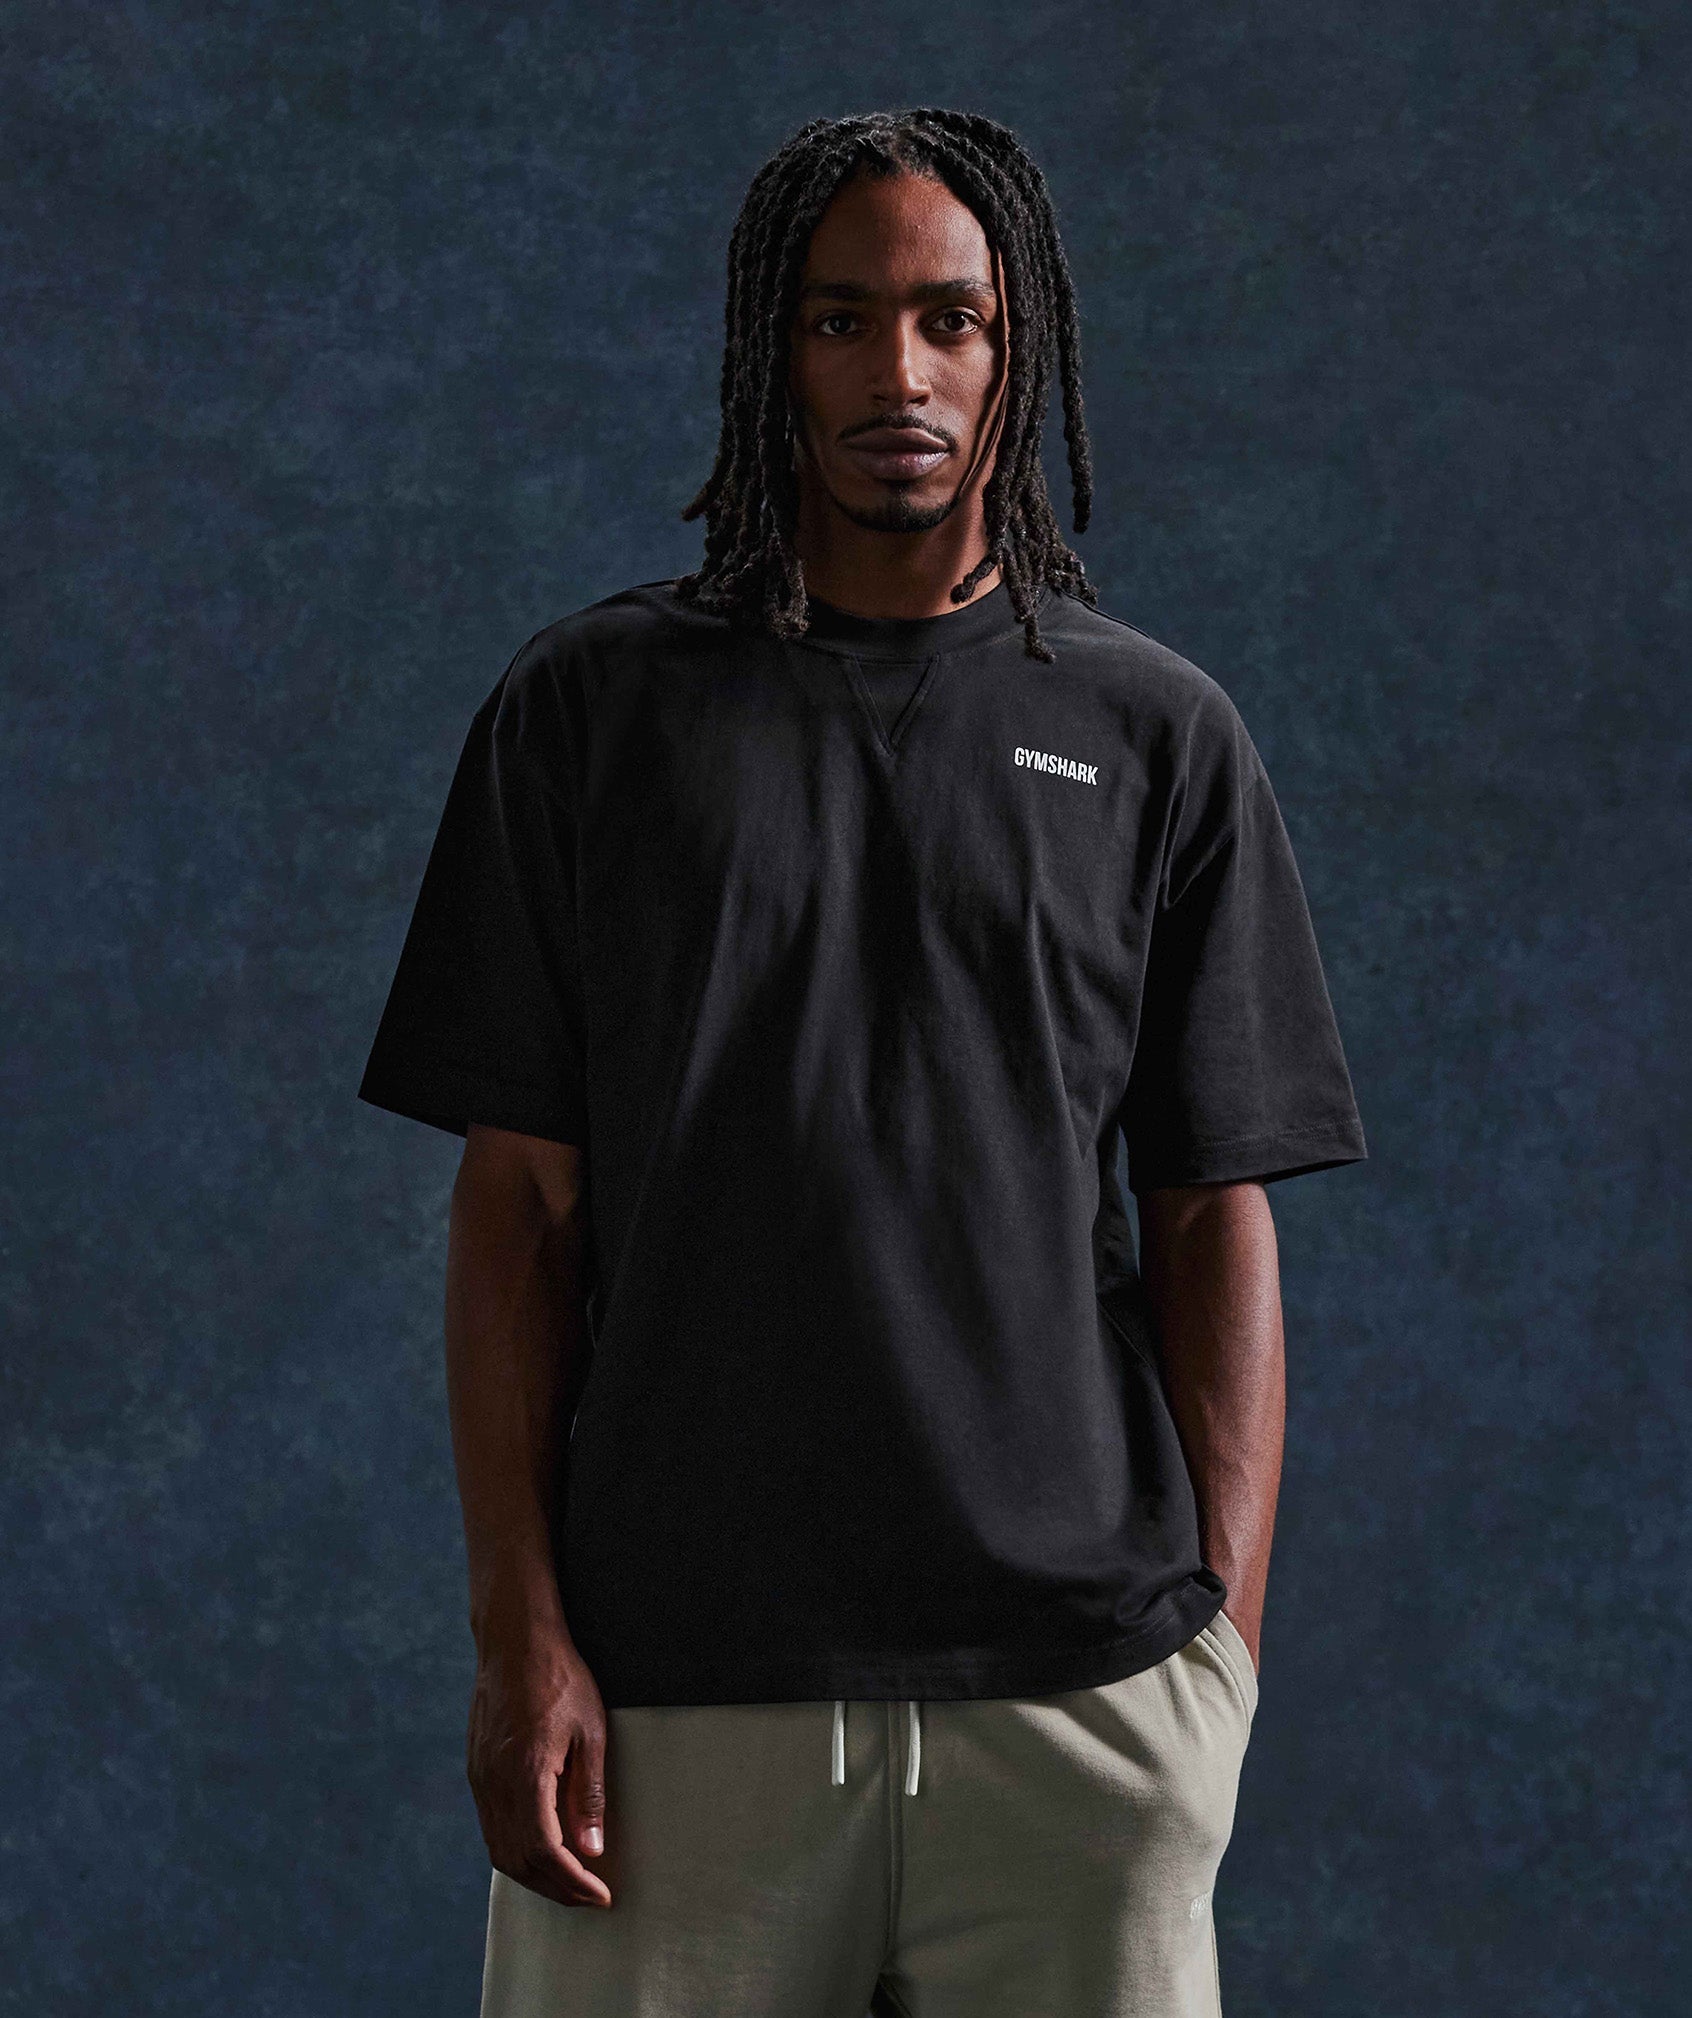 Rest Day Sweats T-Shirt in Black - view 1